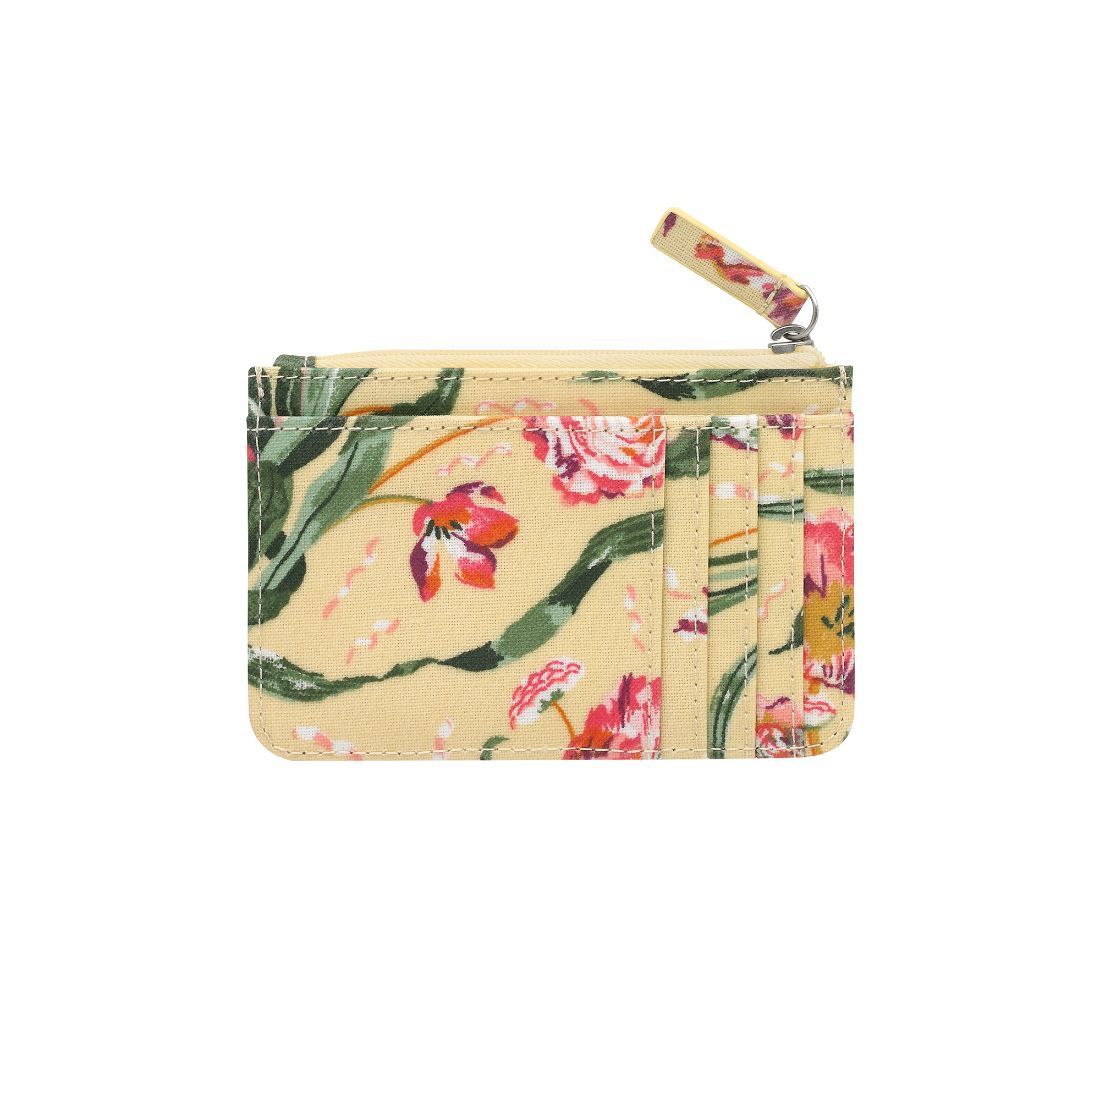  Ví đựng thẻ/Small Card & Coin Purse - Floral Fancy 